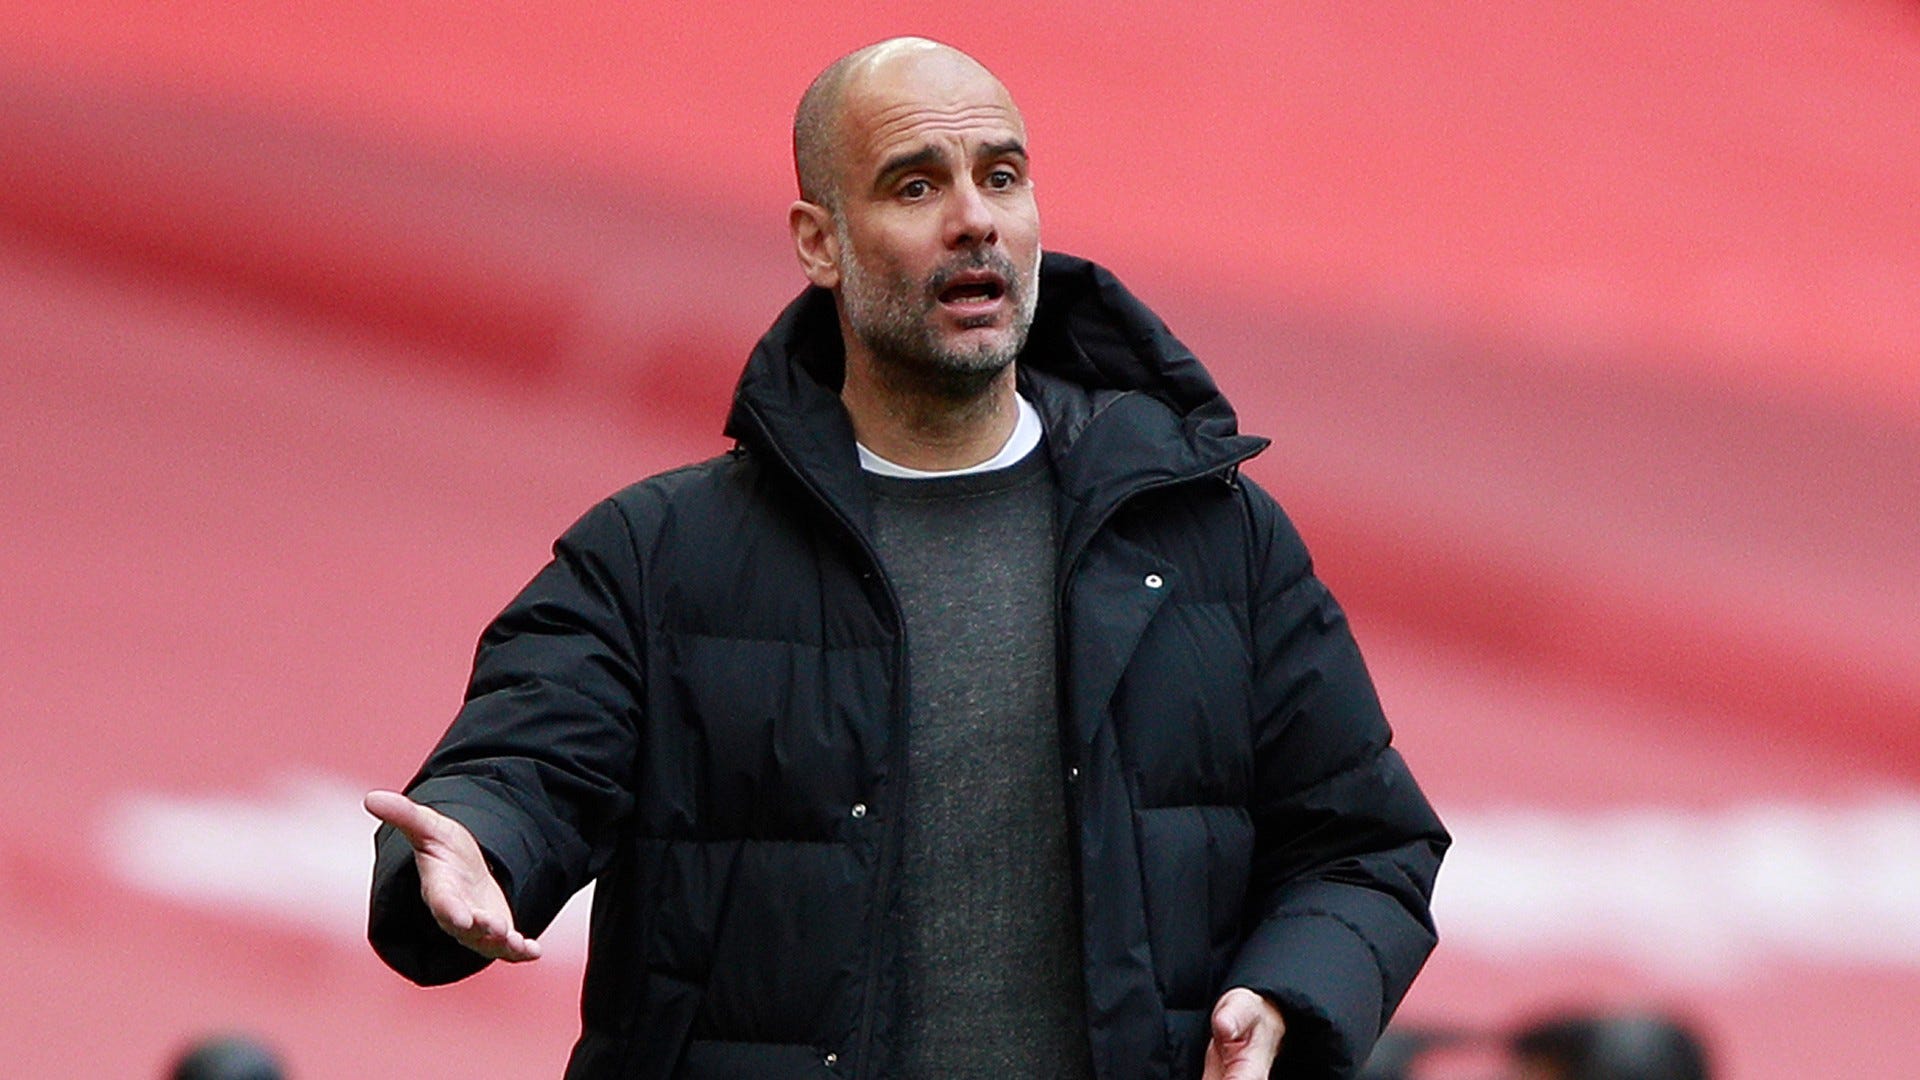 'Don't say we didn't pay attention' - Pep dismisses carelessness suggestions after Man City crash out of FA Cup